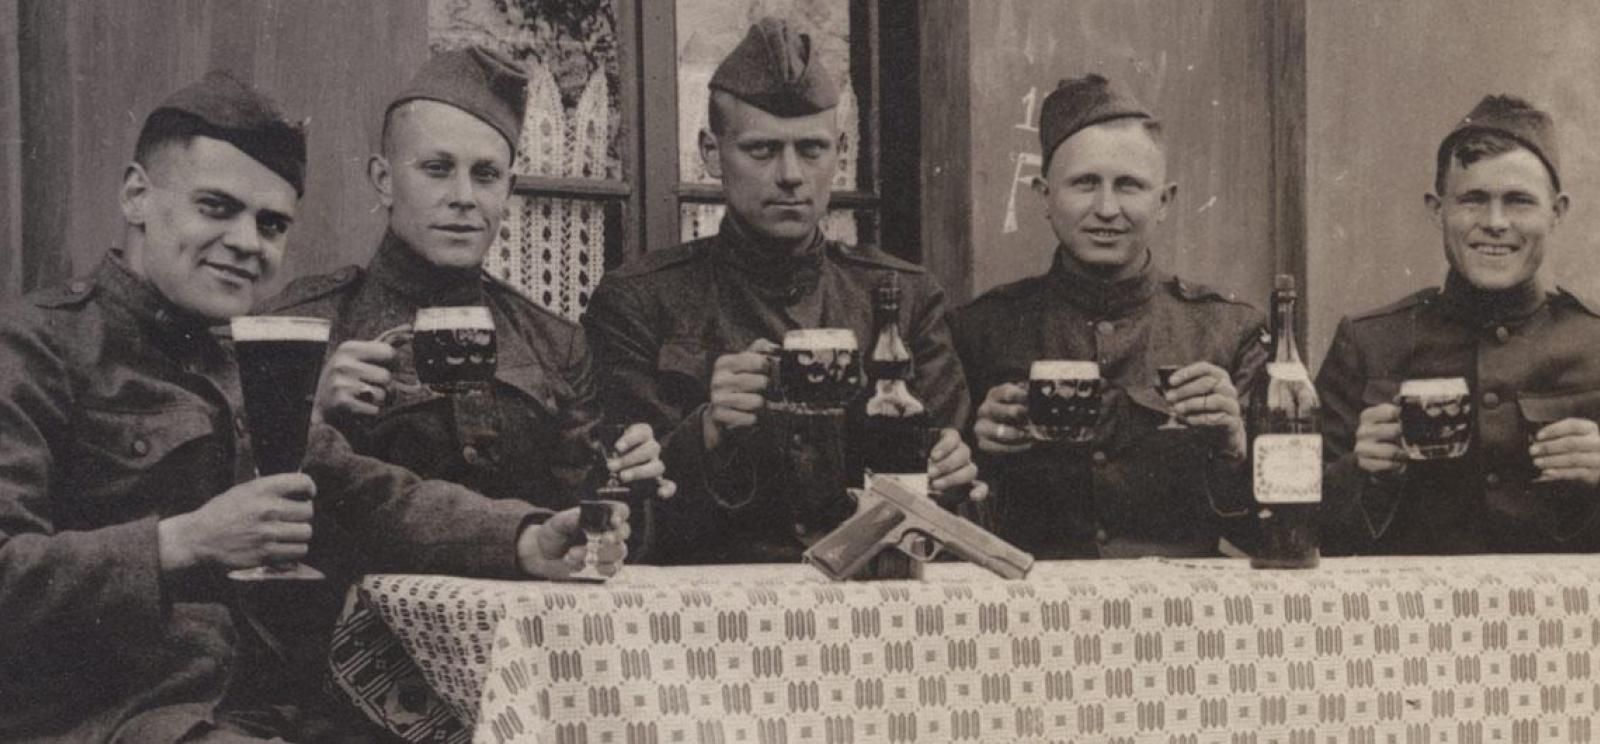 Black and white photograph of WWI-era soldiers sitting in a row facing the camera. They are all raising mugs of beer in a toast.